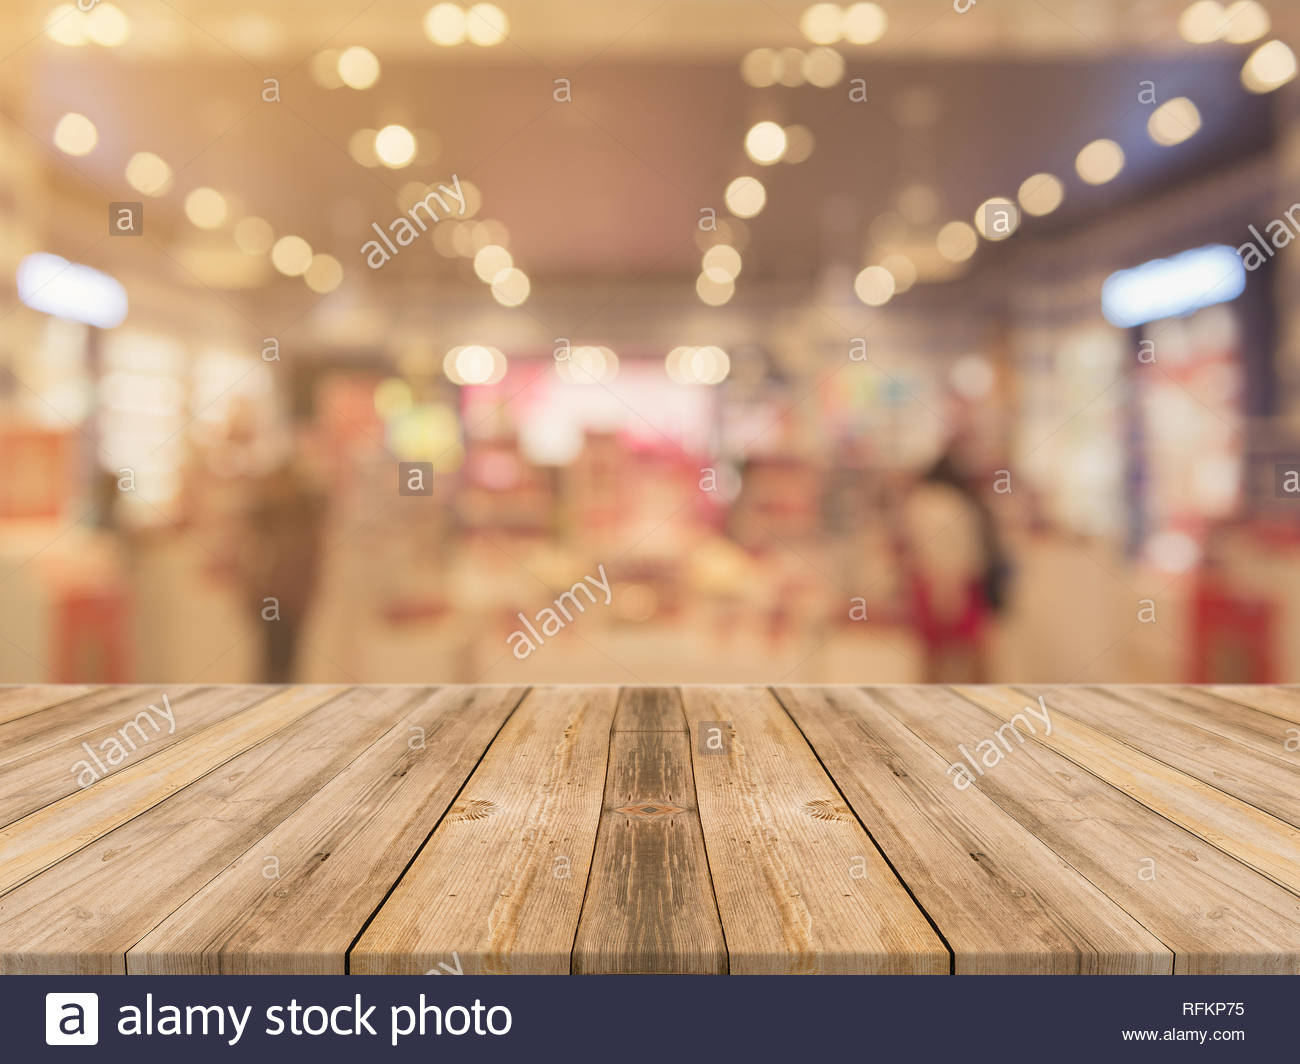 Wooden Board Empty Table Top On Of Blurred Background Perspective